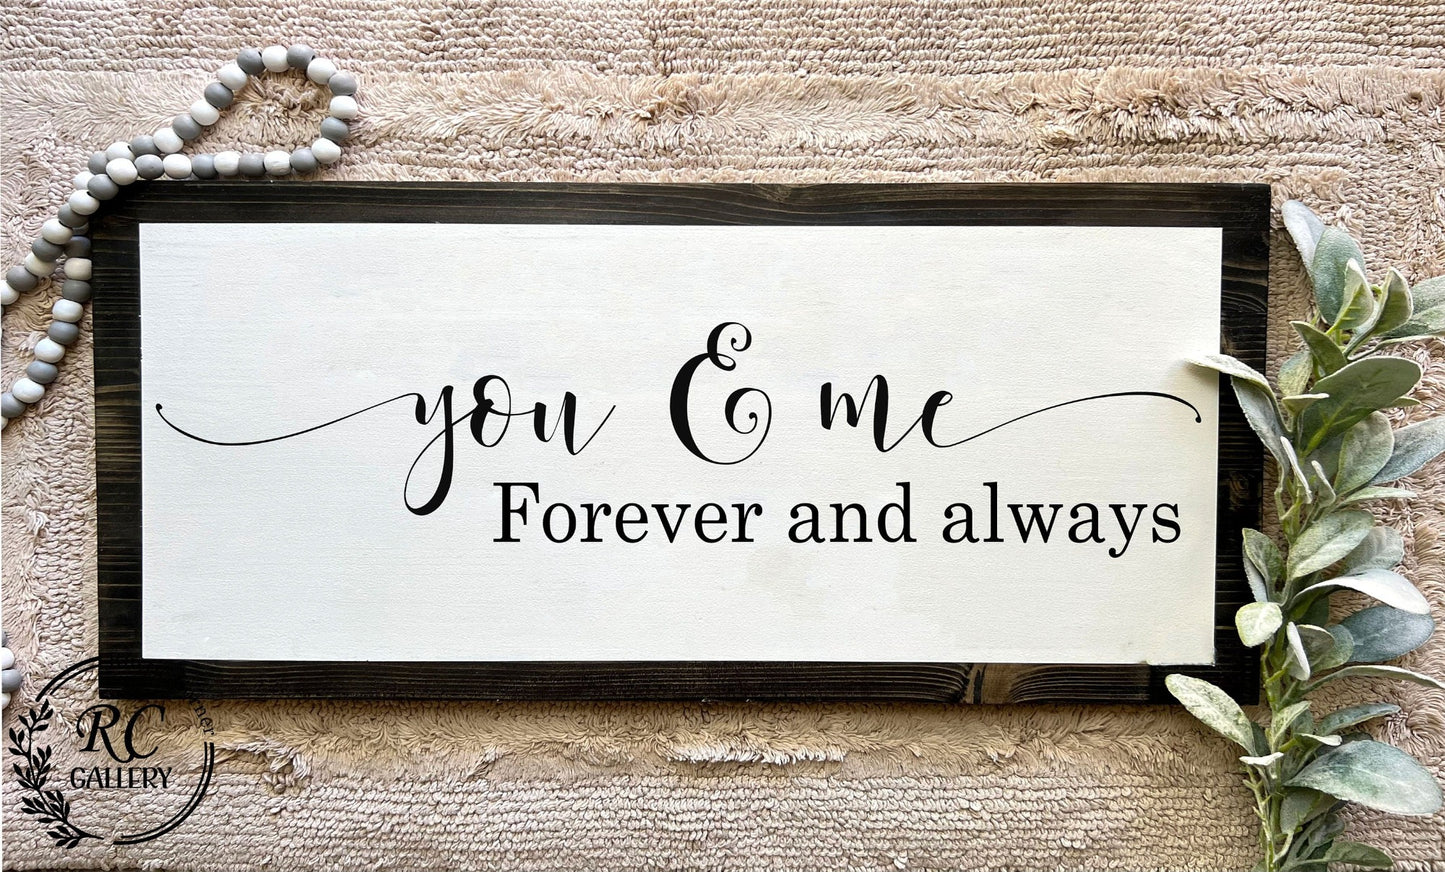 You & me Forever and always wood sign.